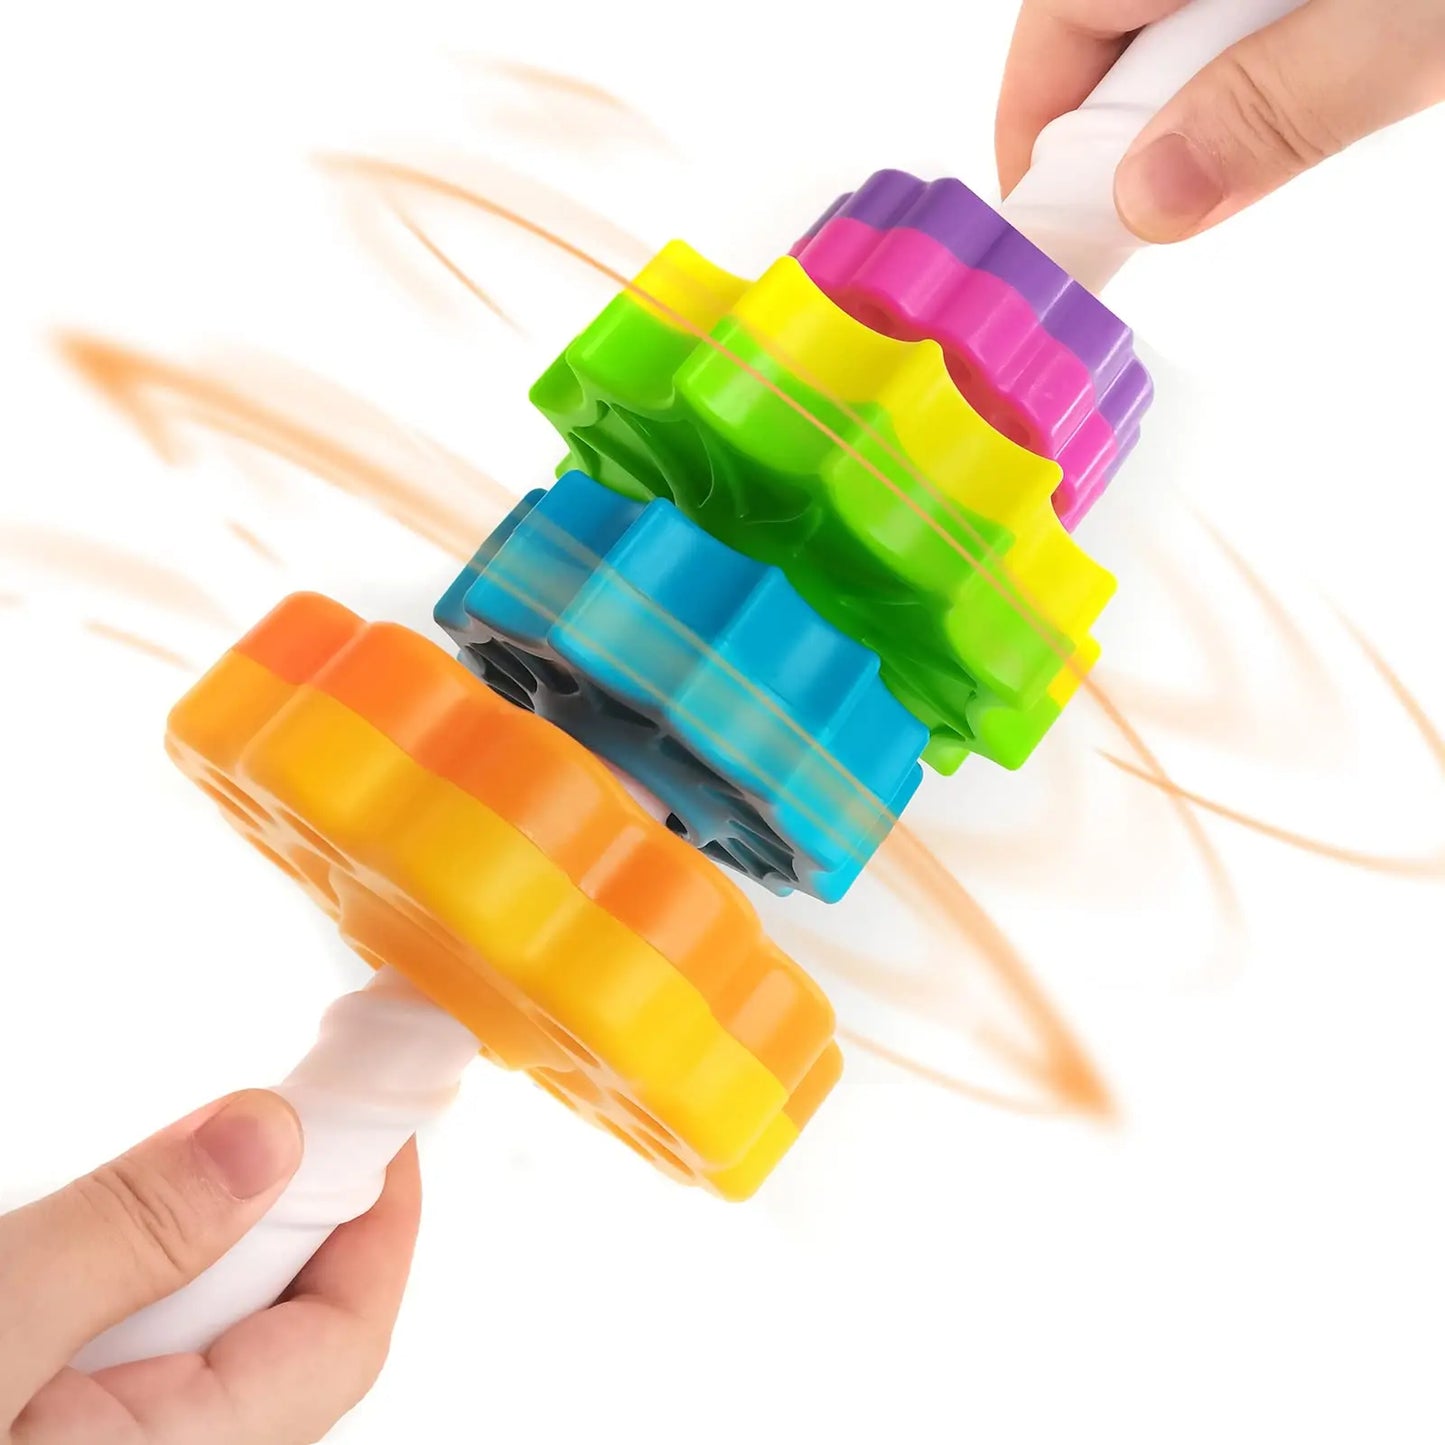 Stacking Toy for Kids Spinning Rainbow Gears Toddler Montessori Educational Sensory Toy Motor Skills Stacking Tower Kids Gifts